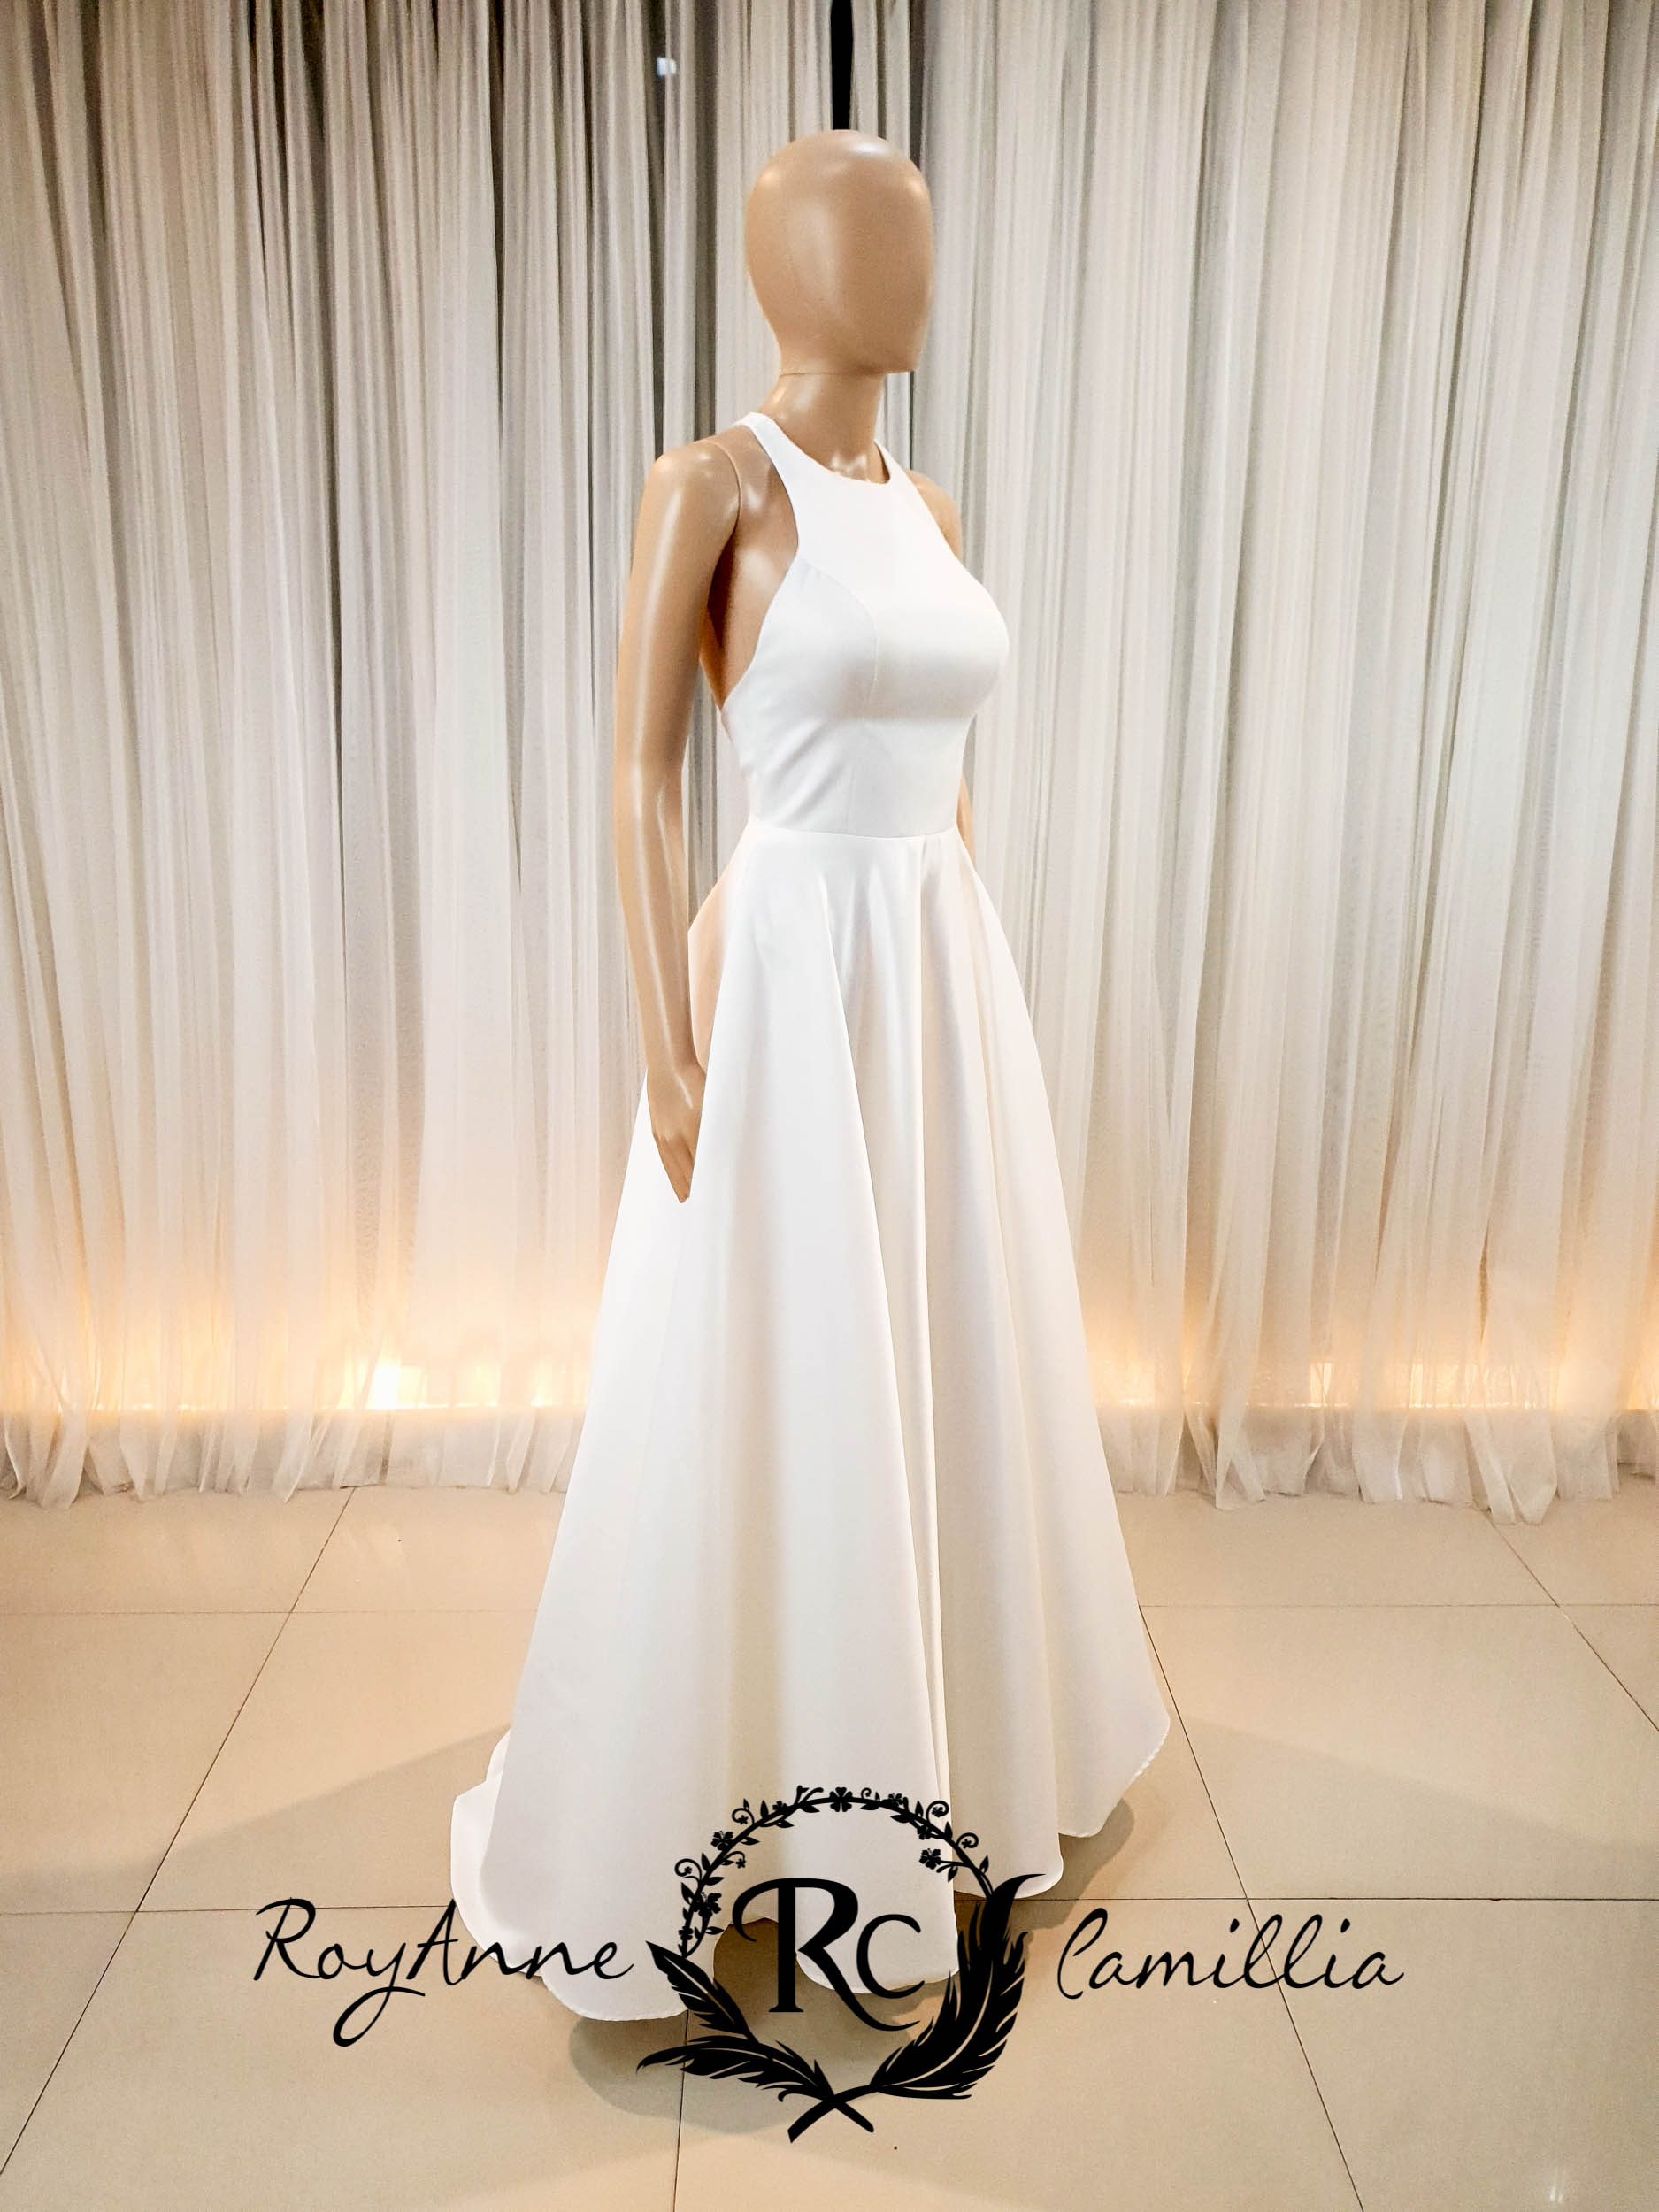 Camille Garcia Bridal Couture – Be a Blushing Bride